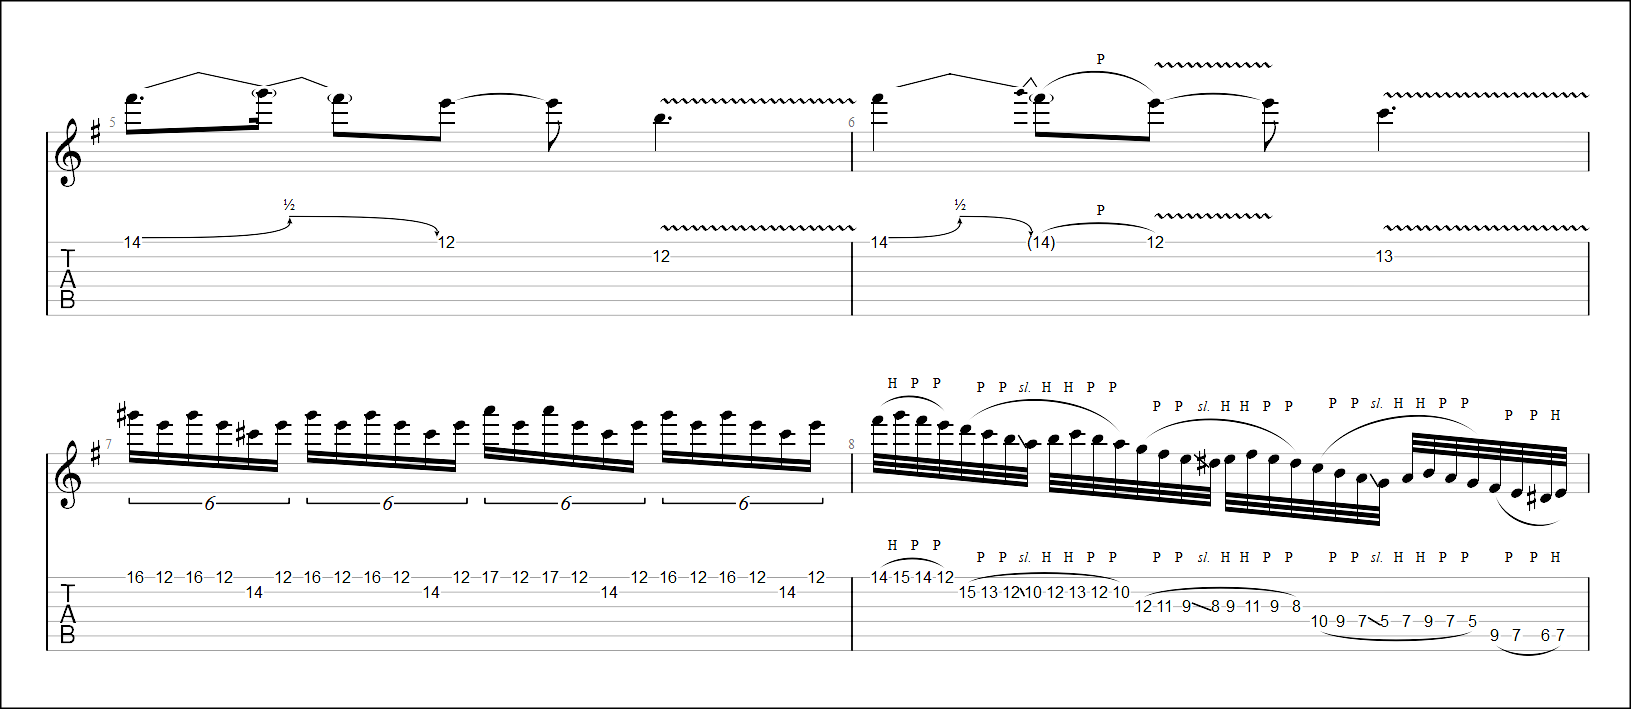 【TAB】Pull Me Under / Dream Theater Guitar SOLO Exercise TAB プルミーアンダー ドリームシアター ギターソロ レガート練習 ギター【Legato Guitar Exercise】